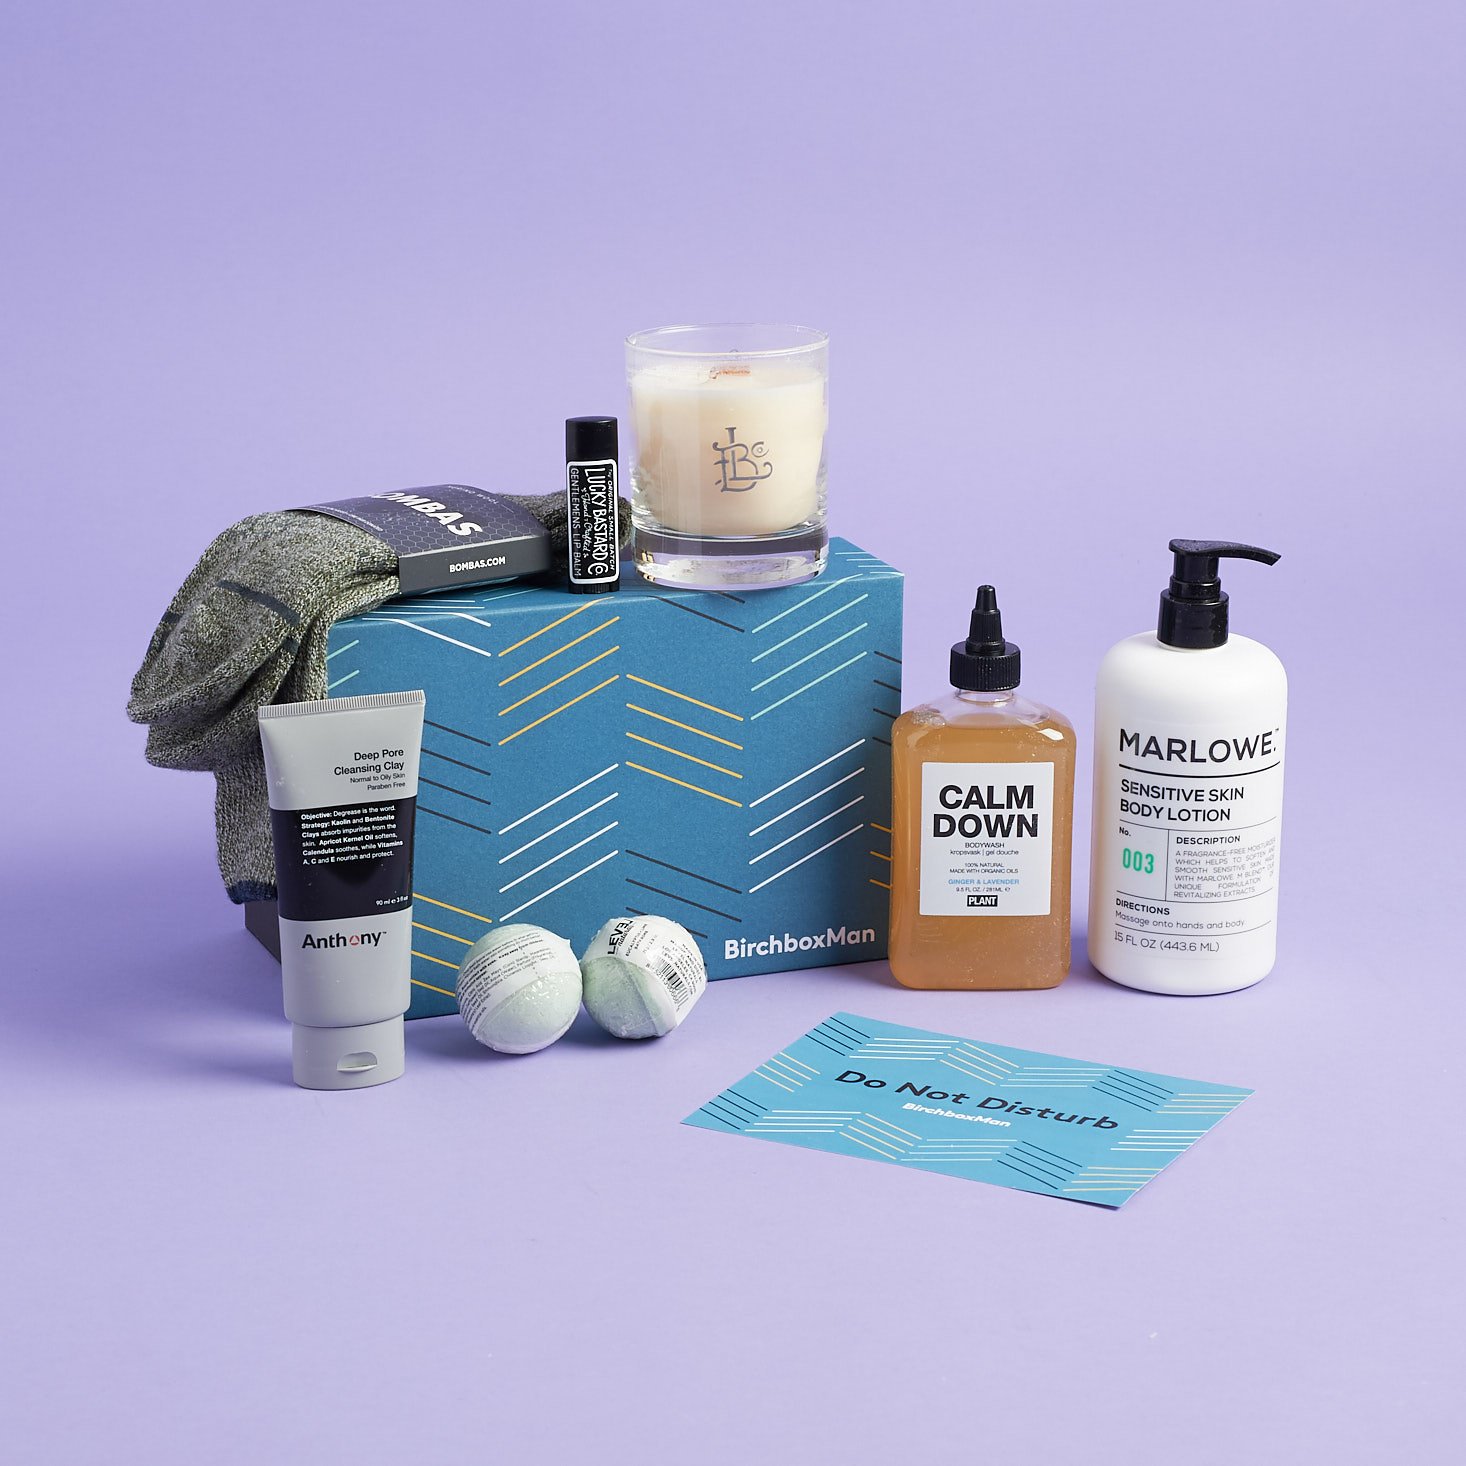 Birchbox Man Limited Edition Box Review – Off The Clock